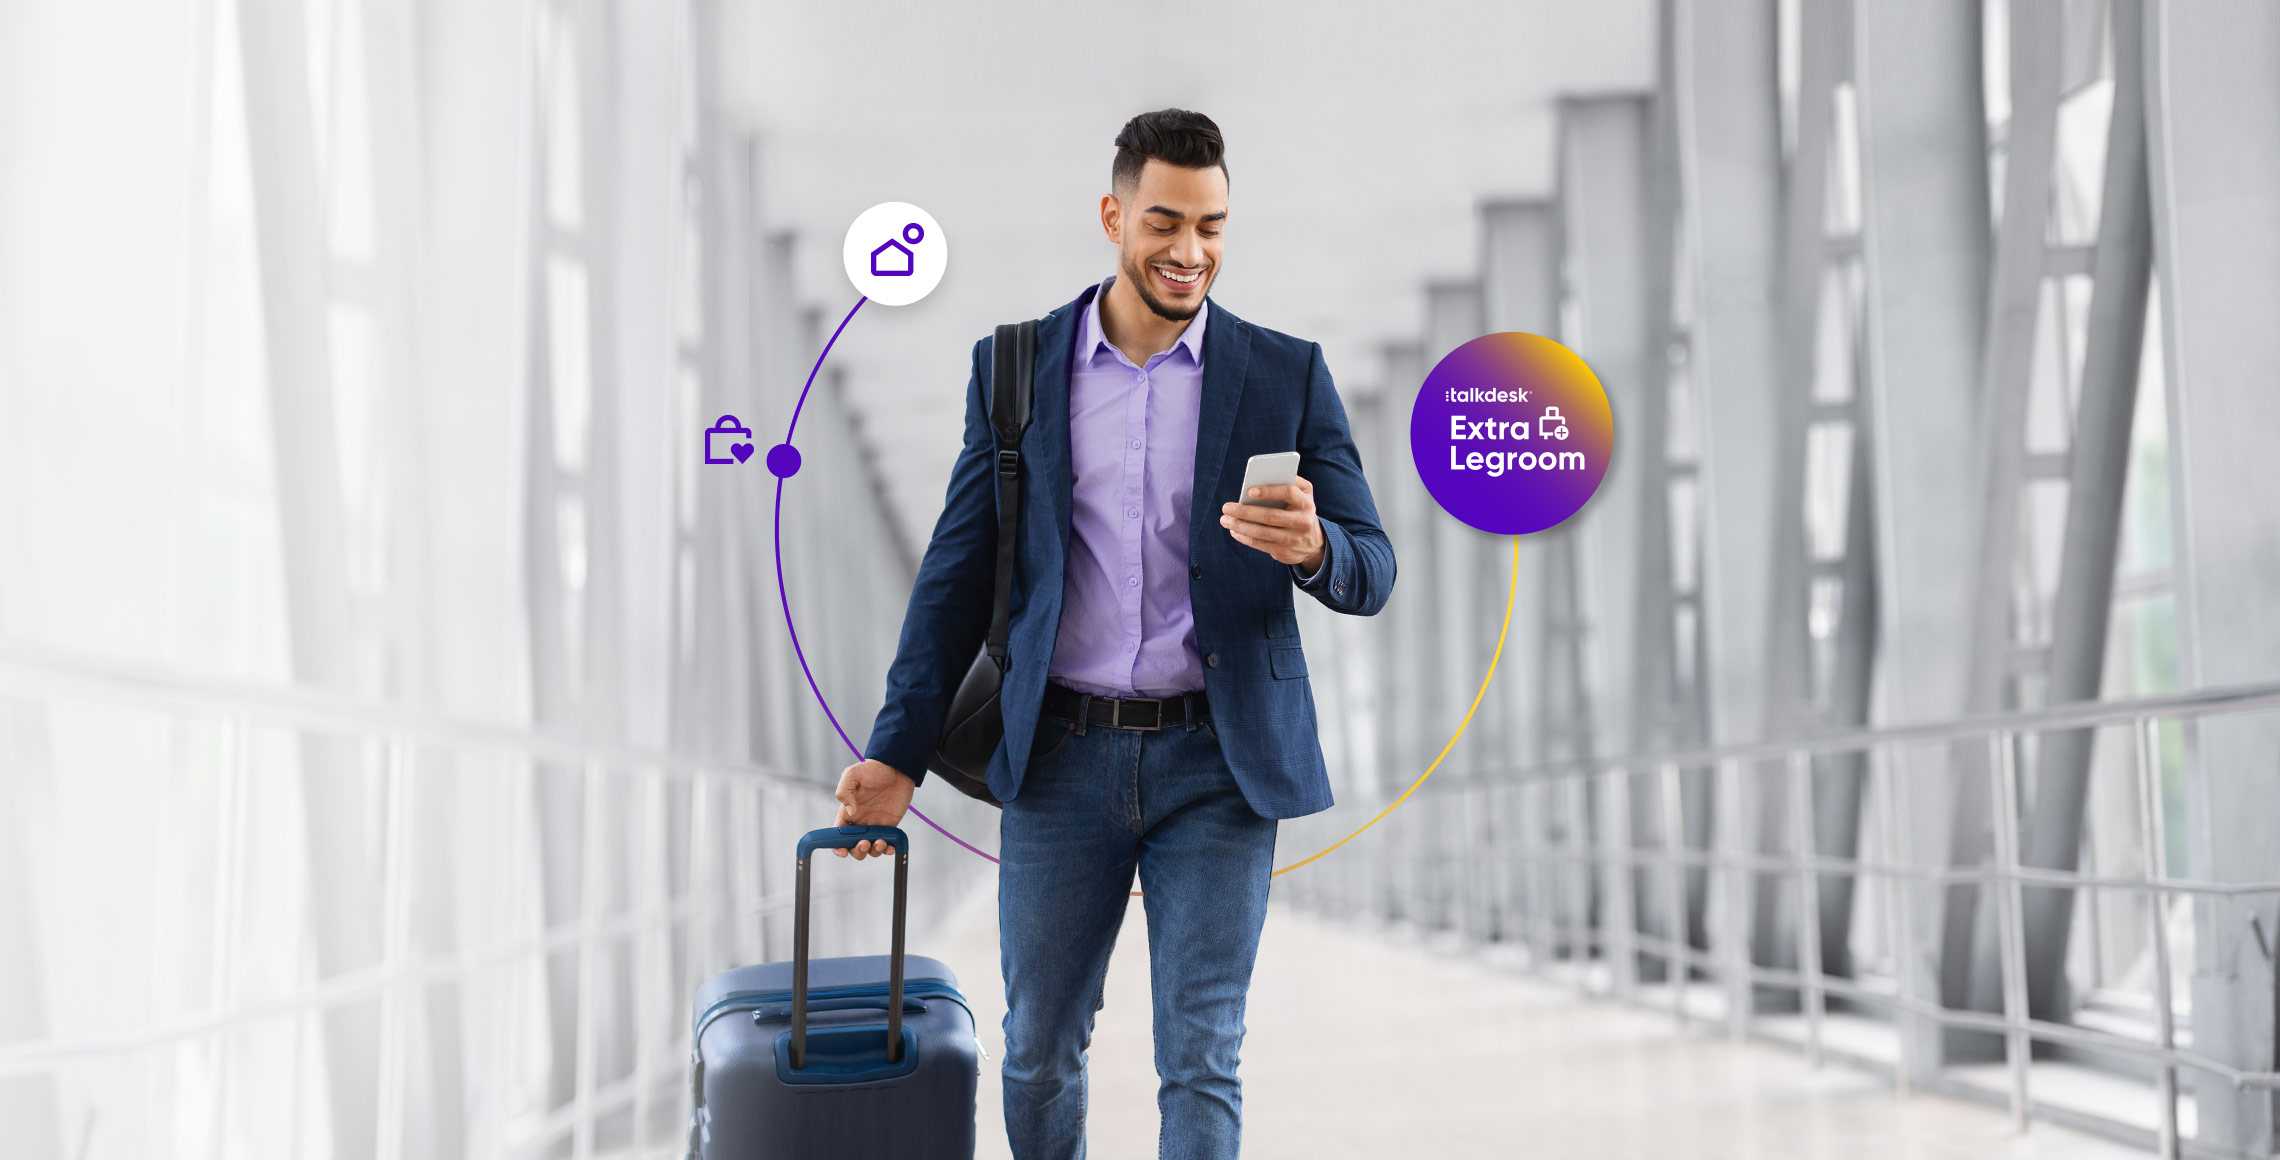 Man pushing a suitcase and looking at his phone. Travel and hospitality icons around him and the text Extra Legroom logo